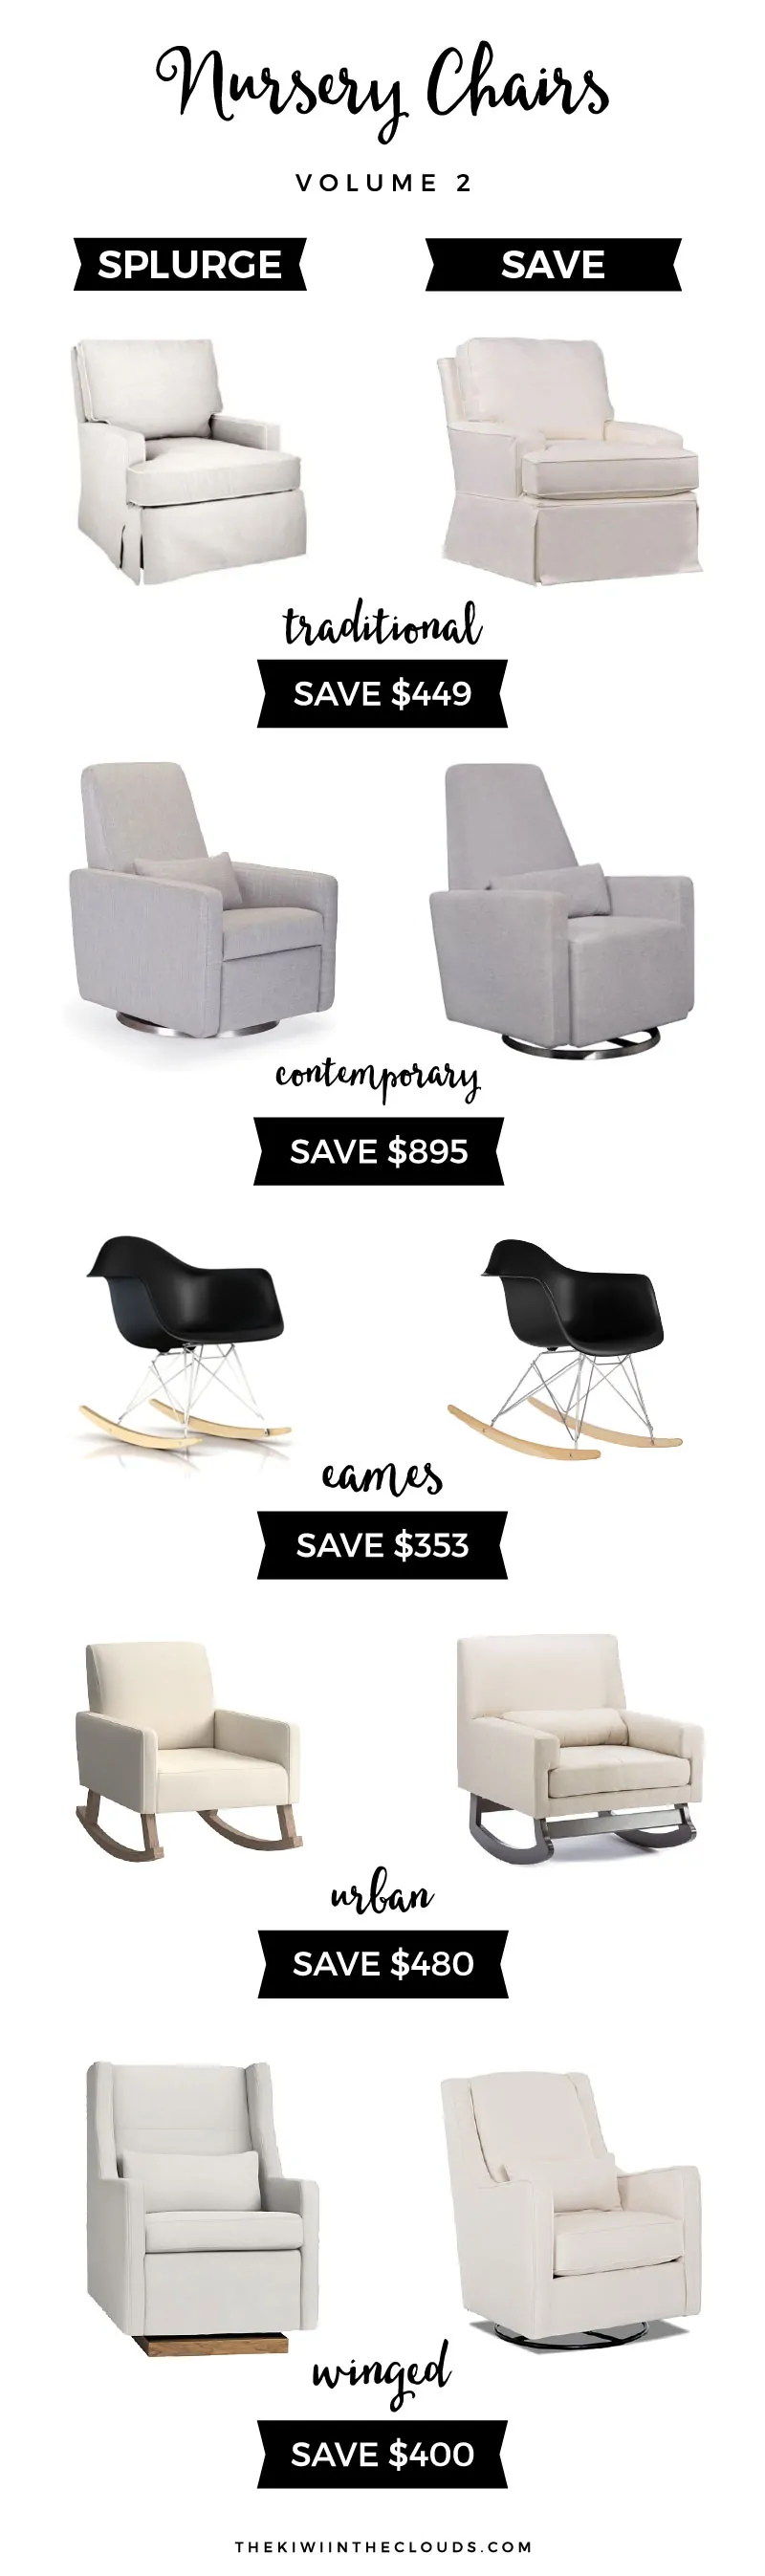 Best Nursery Chairs For Every Budget | baby gear | registry